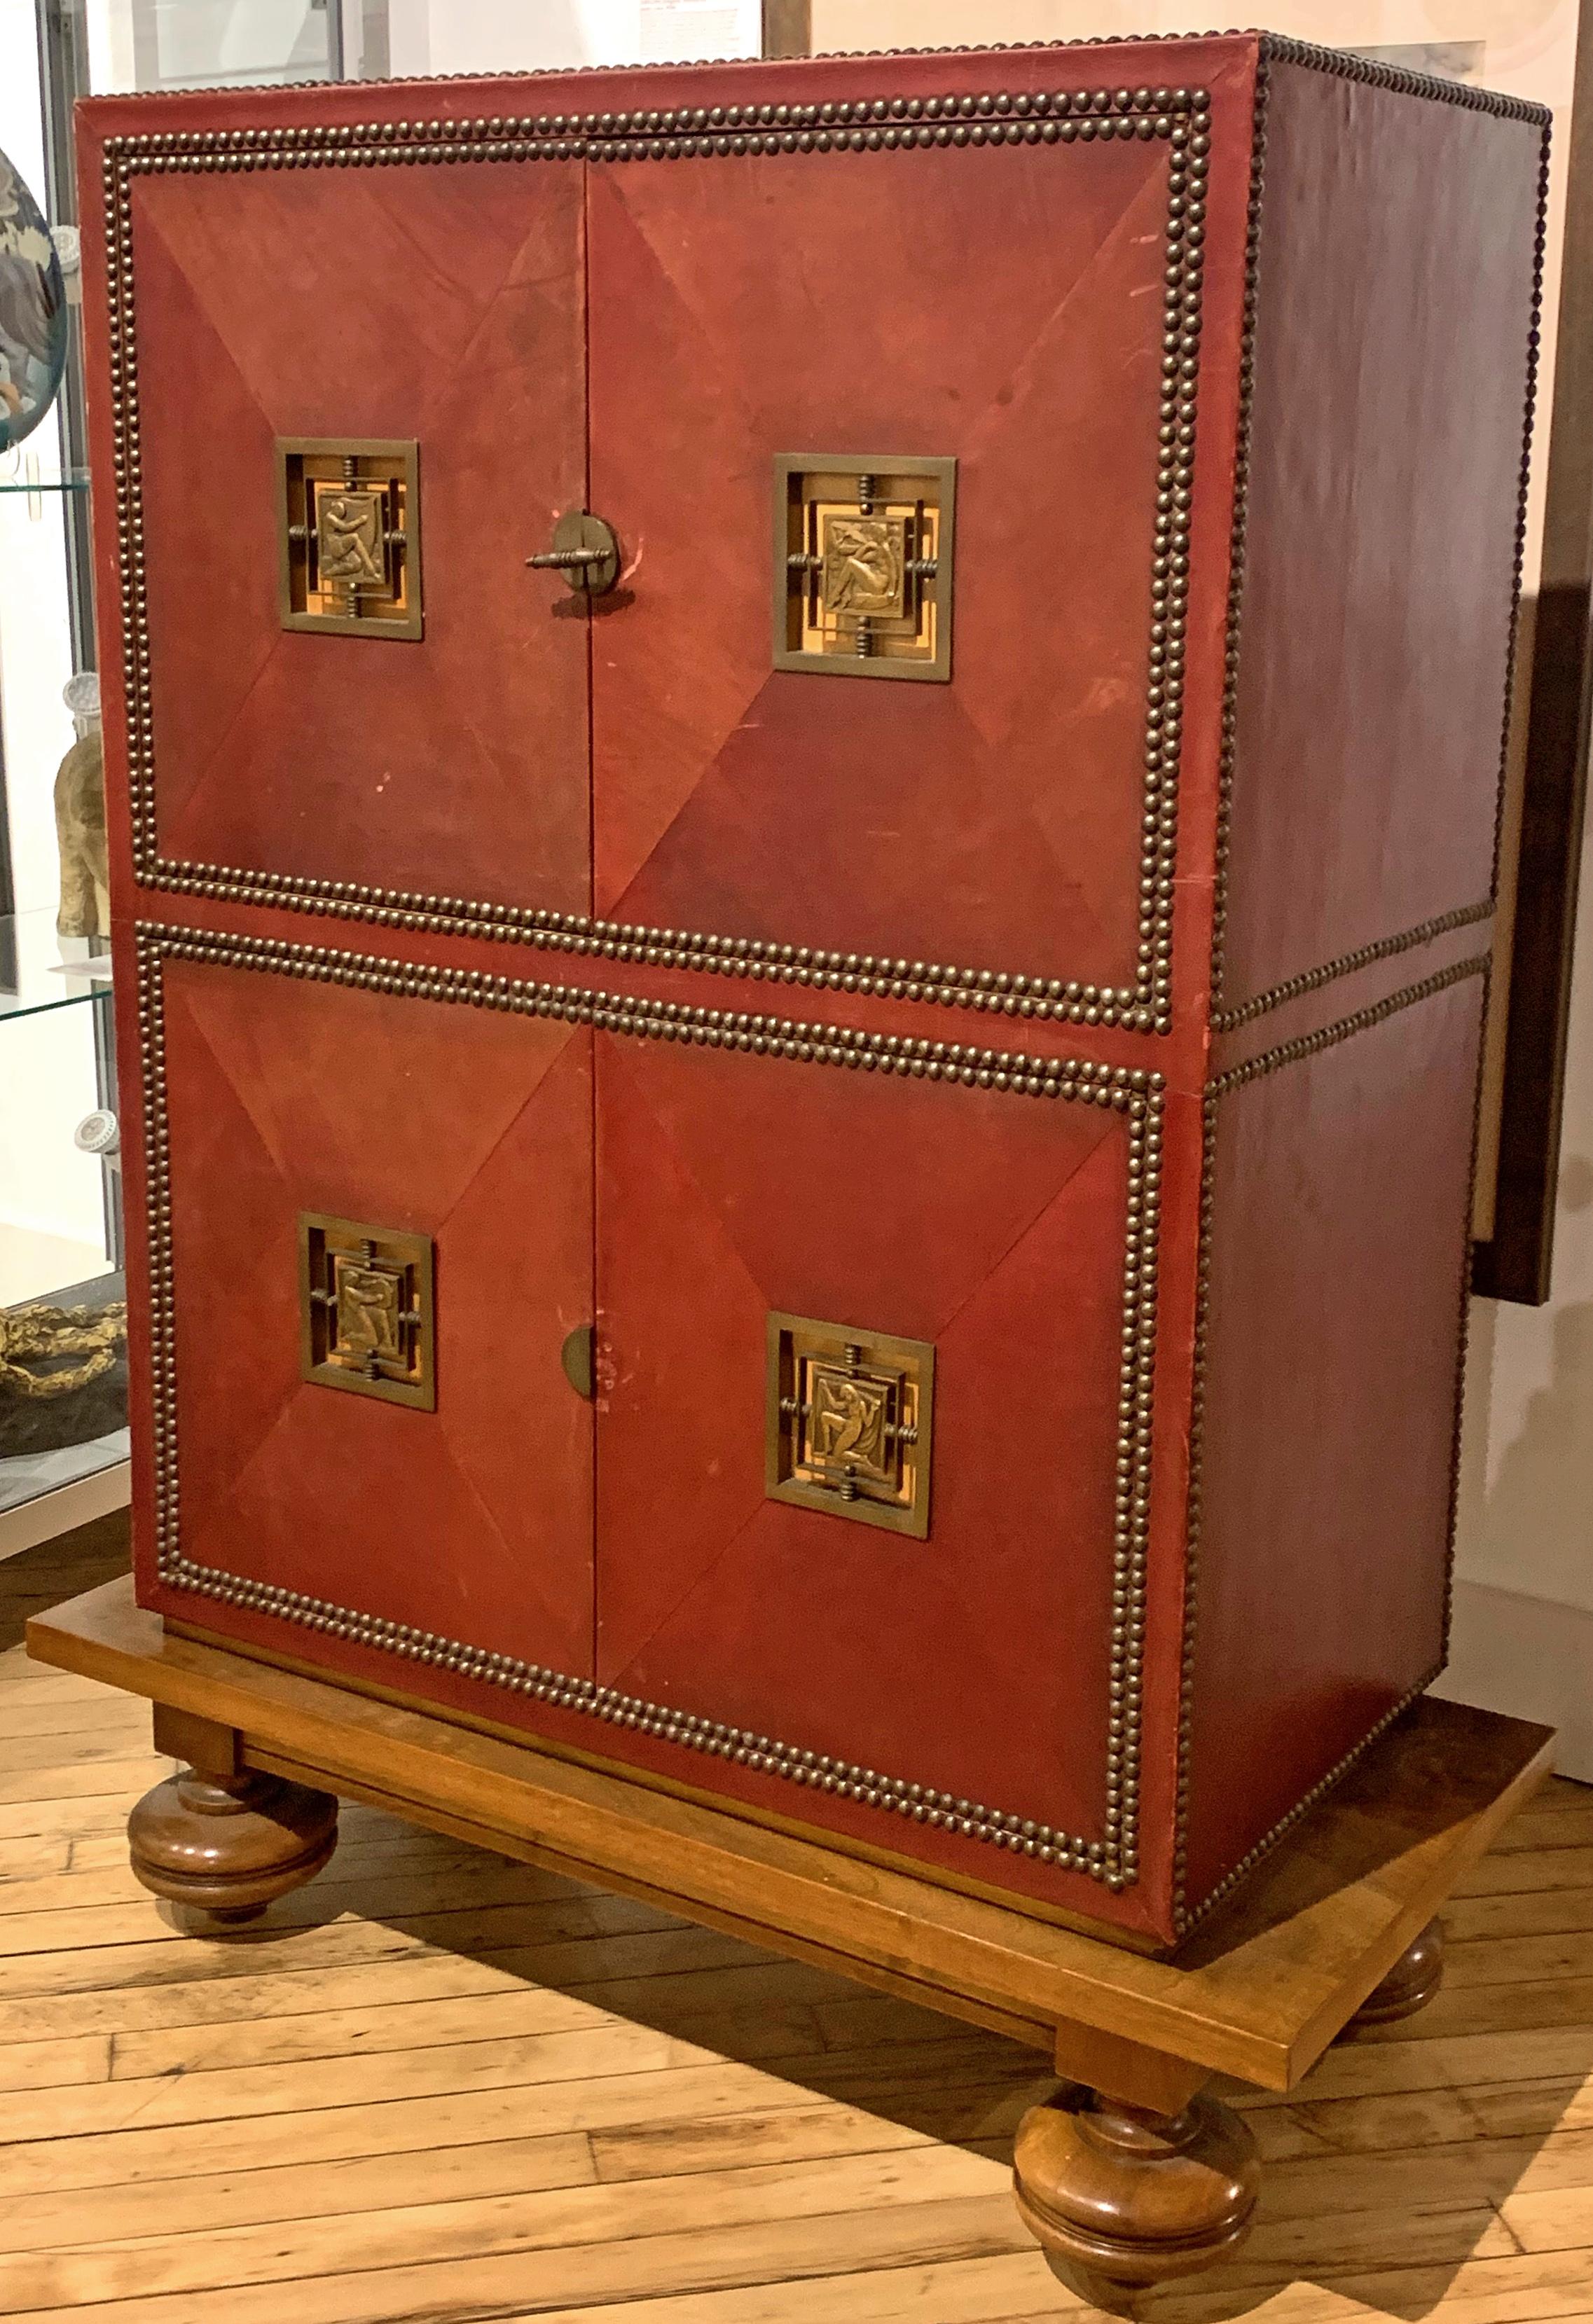 Beautifully proportioned, constructed and finished, this unique and remarkable Art Deco cabinet is covered with leather dyed a rich, deep red color, and features four Art Deco bronze mounts depicting nude figures celebrating Music and Art. The